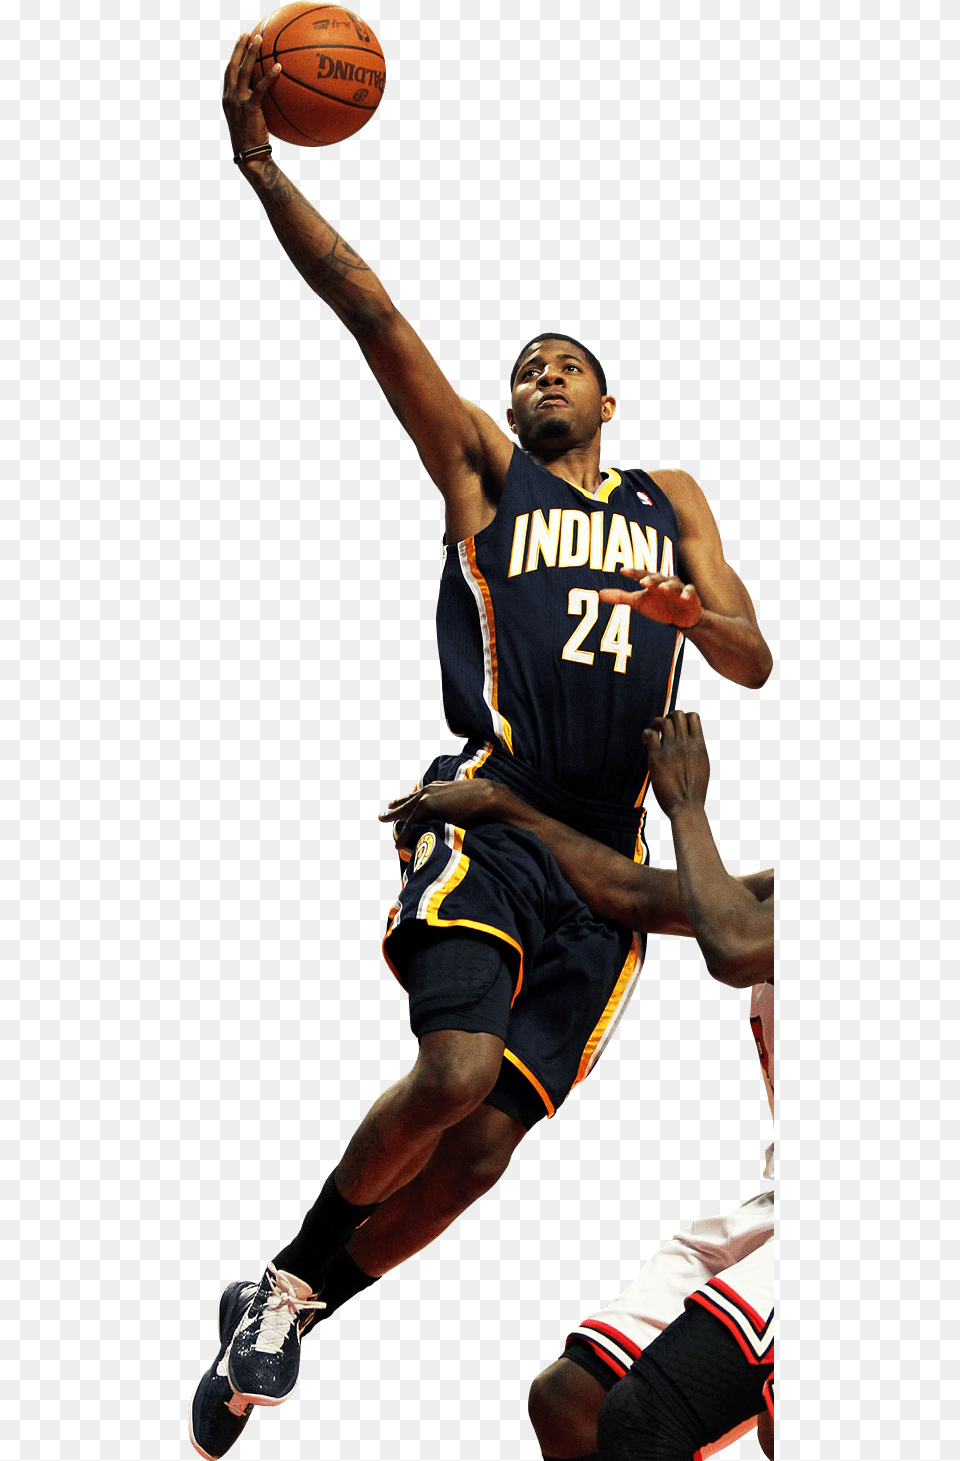 Paul George Amp Luol Deng Photo By Friartown Paul George Basketball Jersey Indiana Pacers Sz Youth, Clothing, Footwear, Shoe, Person Png Image